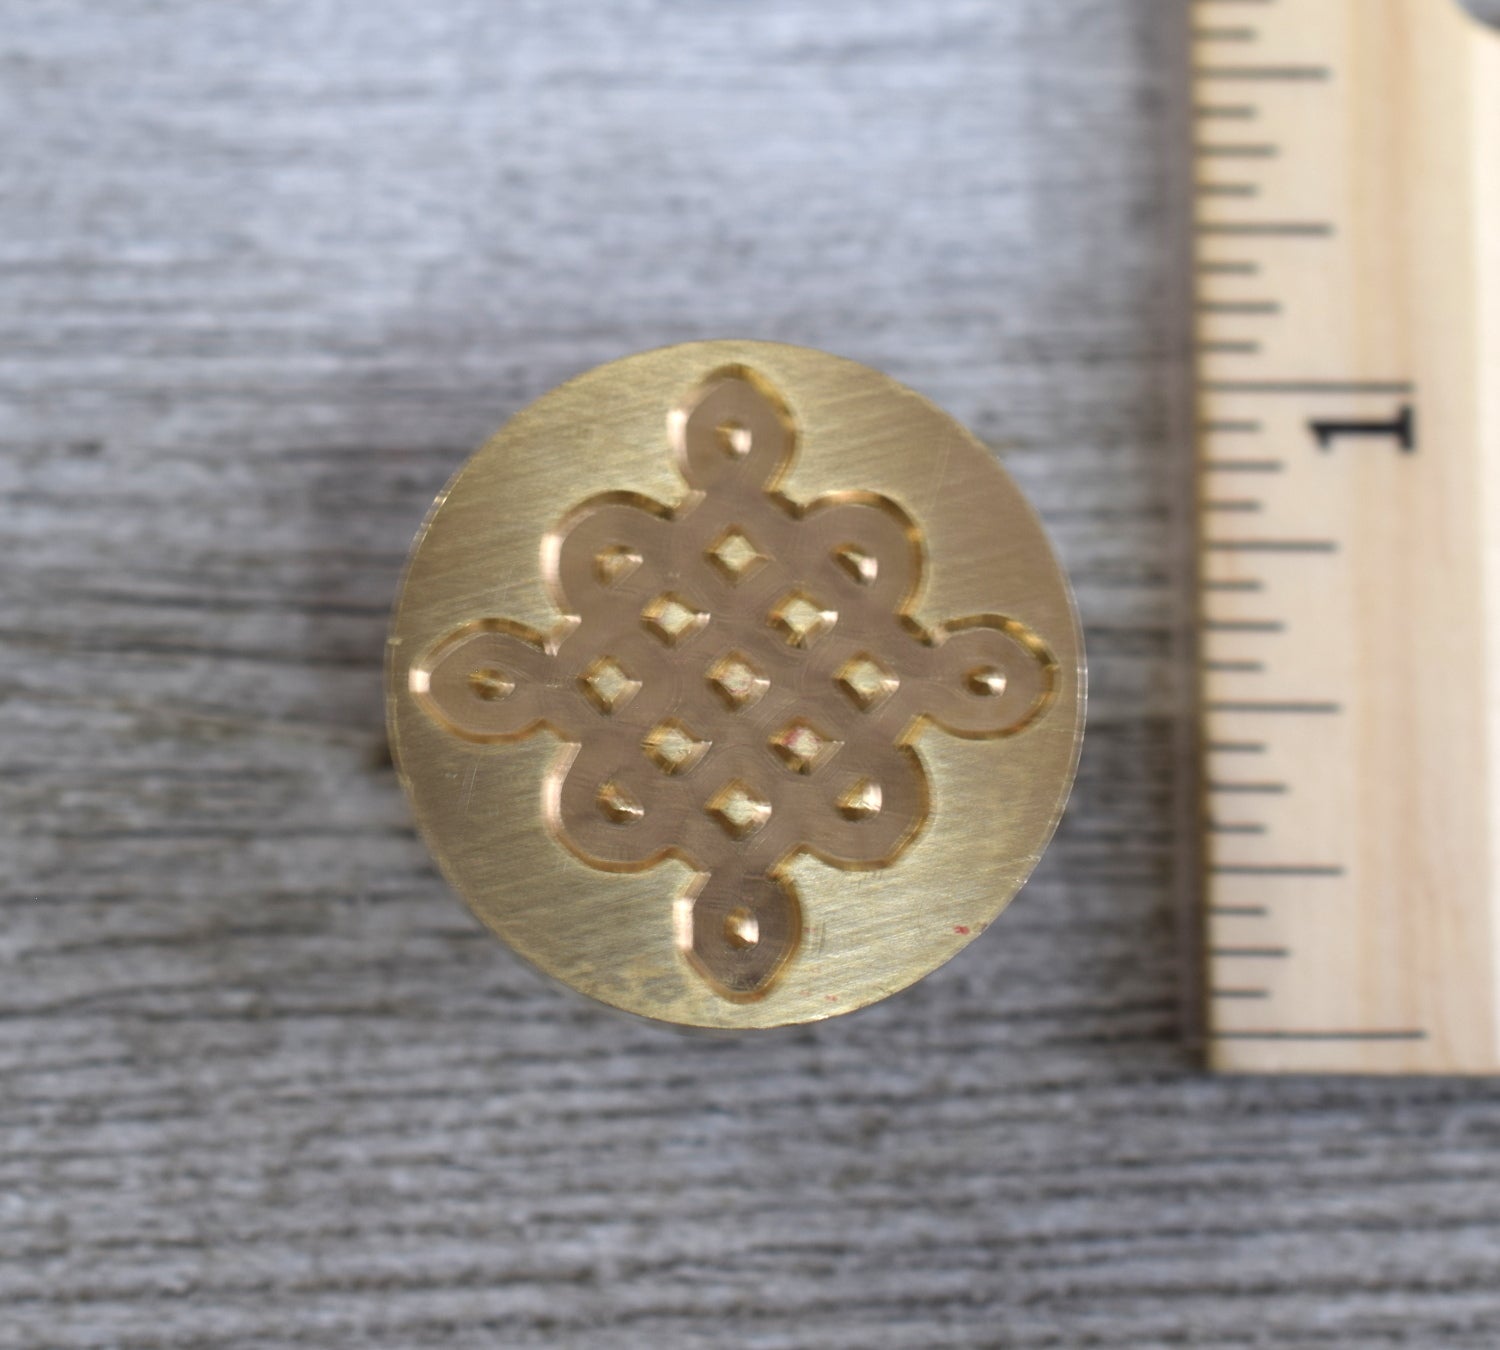 Celtic Knot Seal Wax Stamp With 6 Patterns Removable Brass Head 1